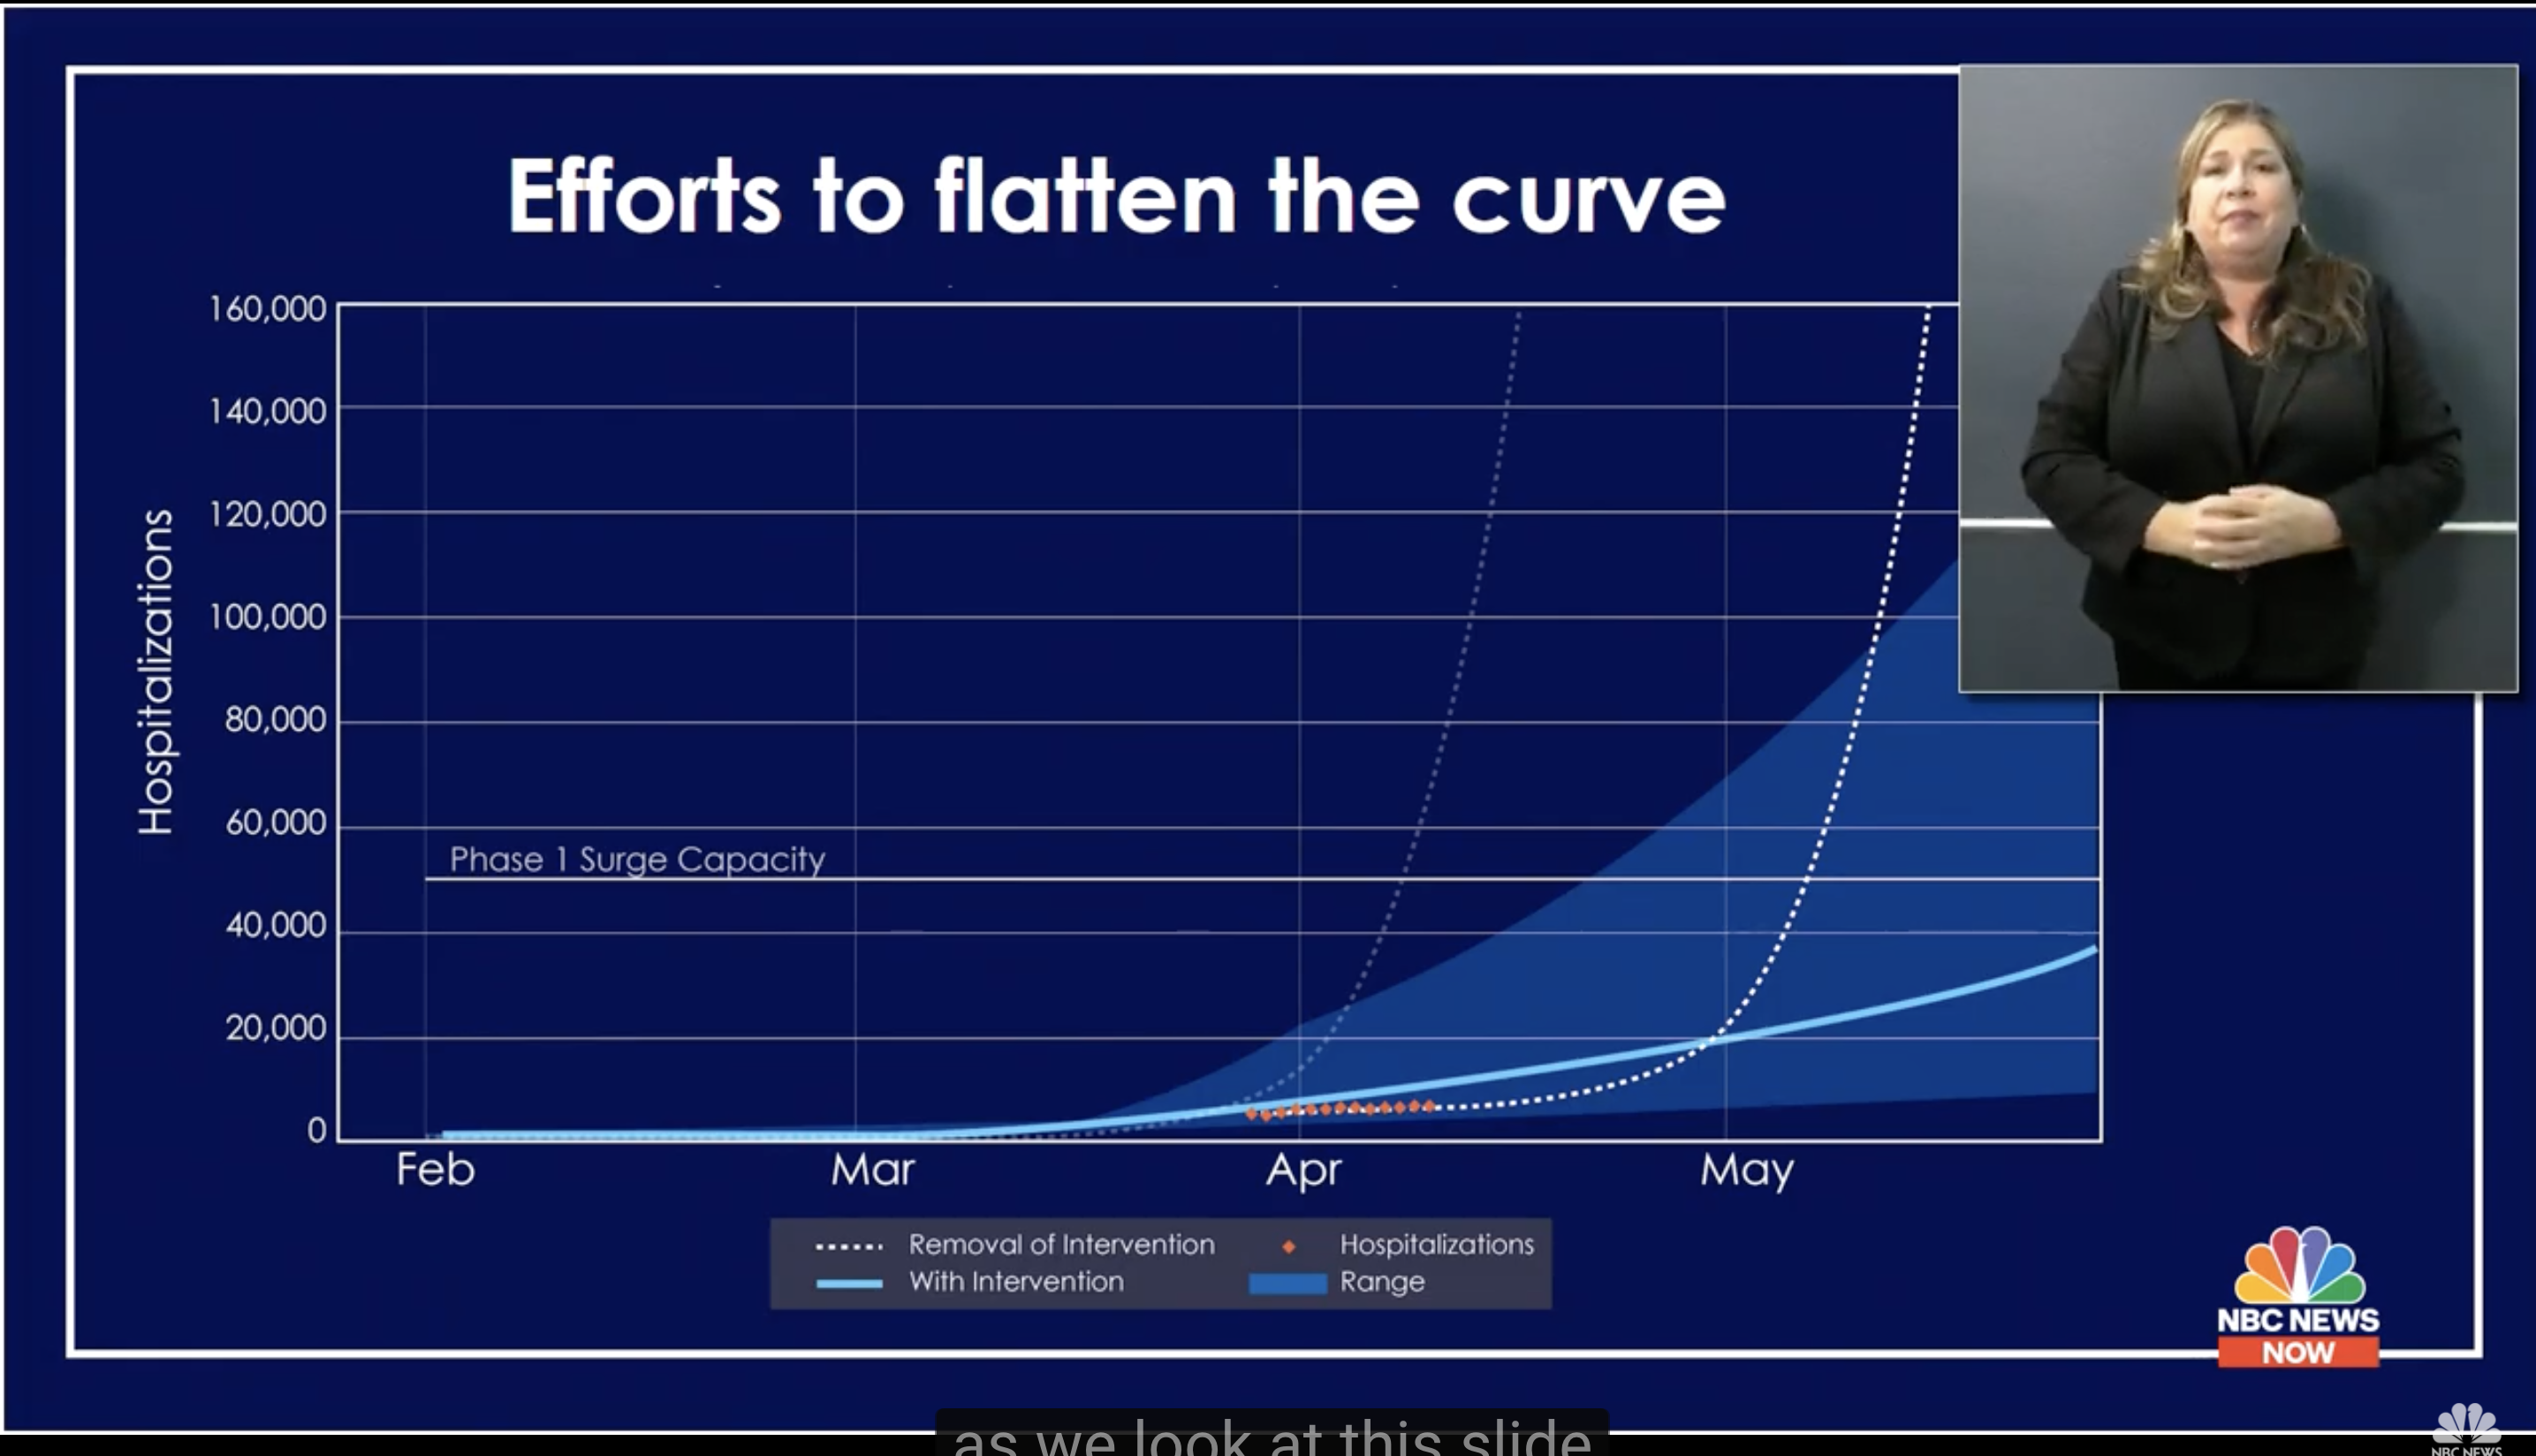 Graph on 'Efforts to flatten the curve' in terms of COVID-19 cases